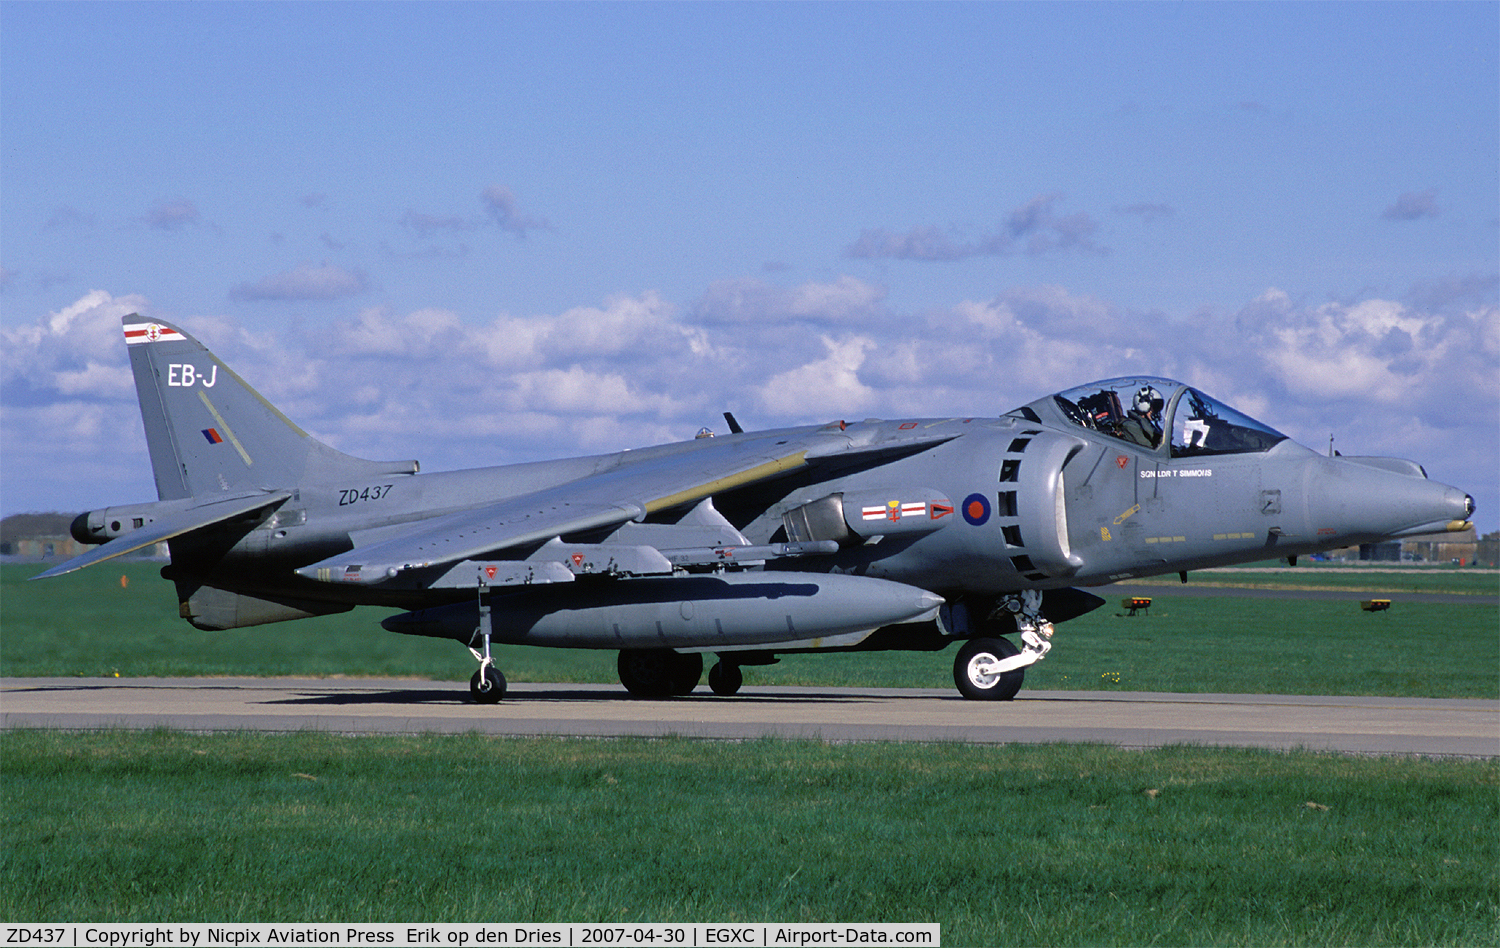 ZD437, British Aerospace Harrier GR.7 C/N P49, RAF,  41 sqn, Harrier GR.7 ZD437 with WW-II wartime code EB-J taxies out for a mission